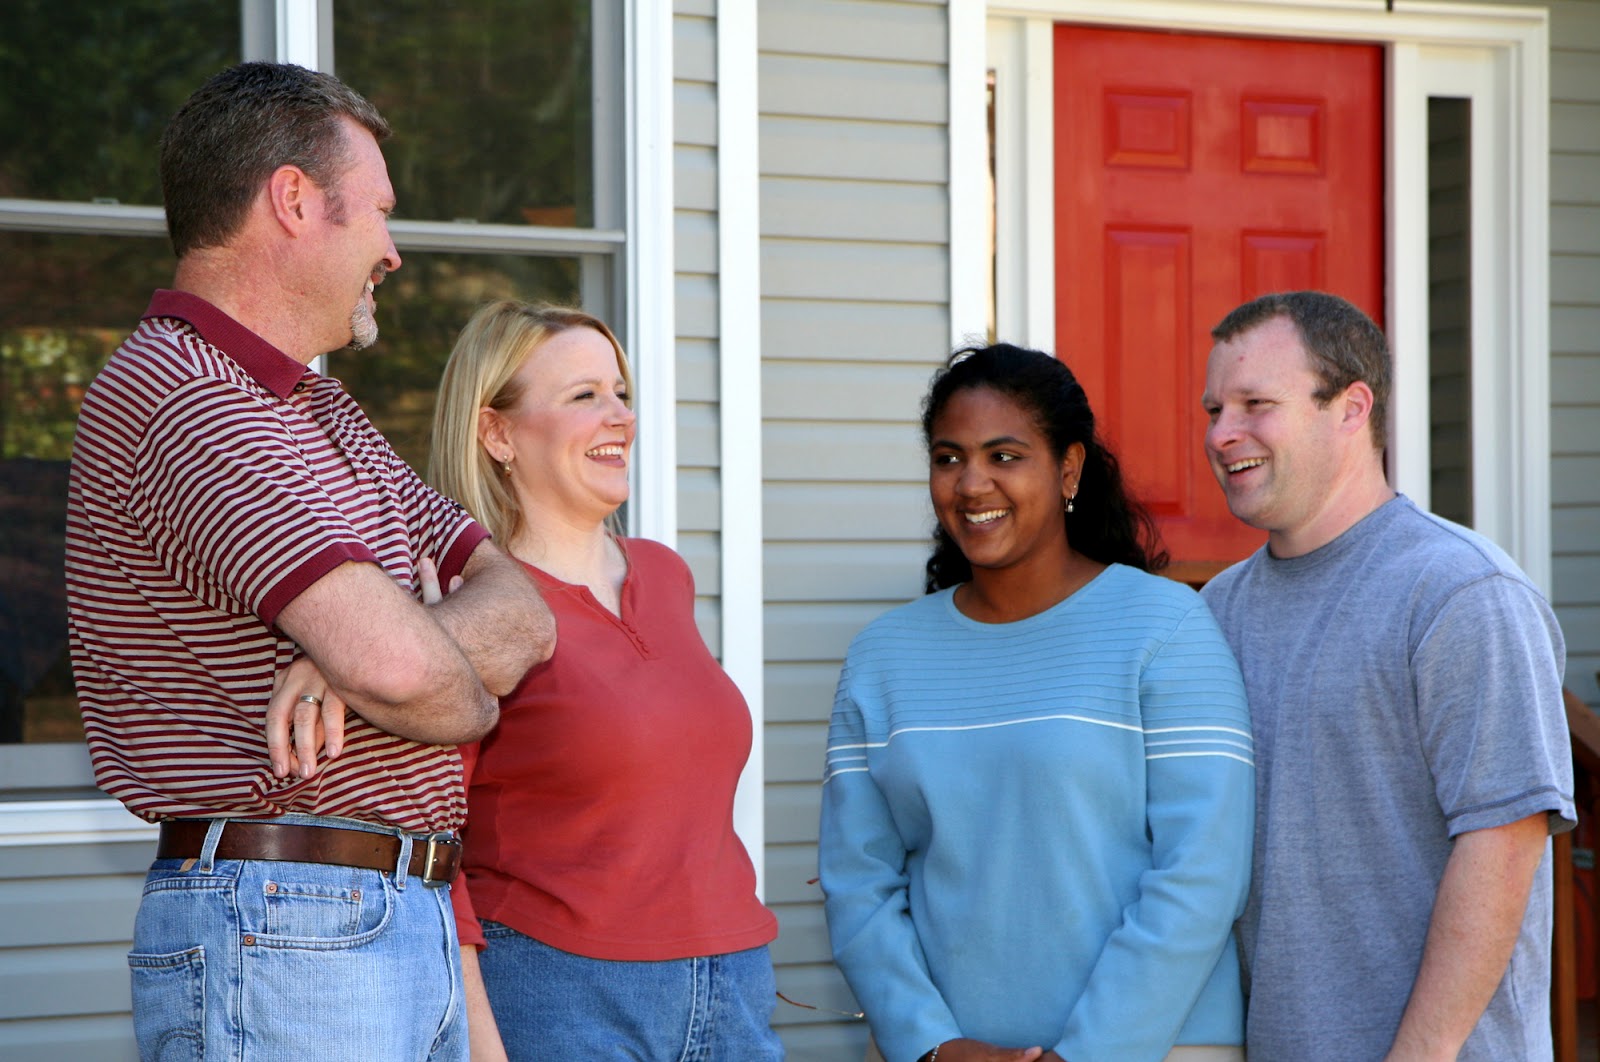 Neighboring couples smile and converse outside a home.